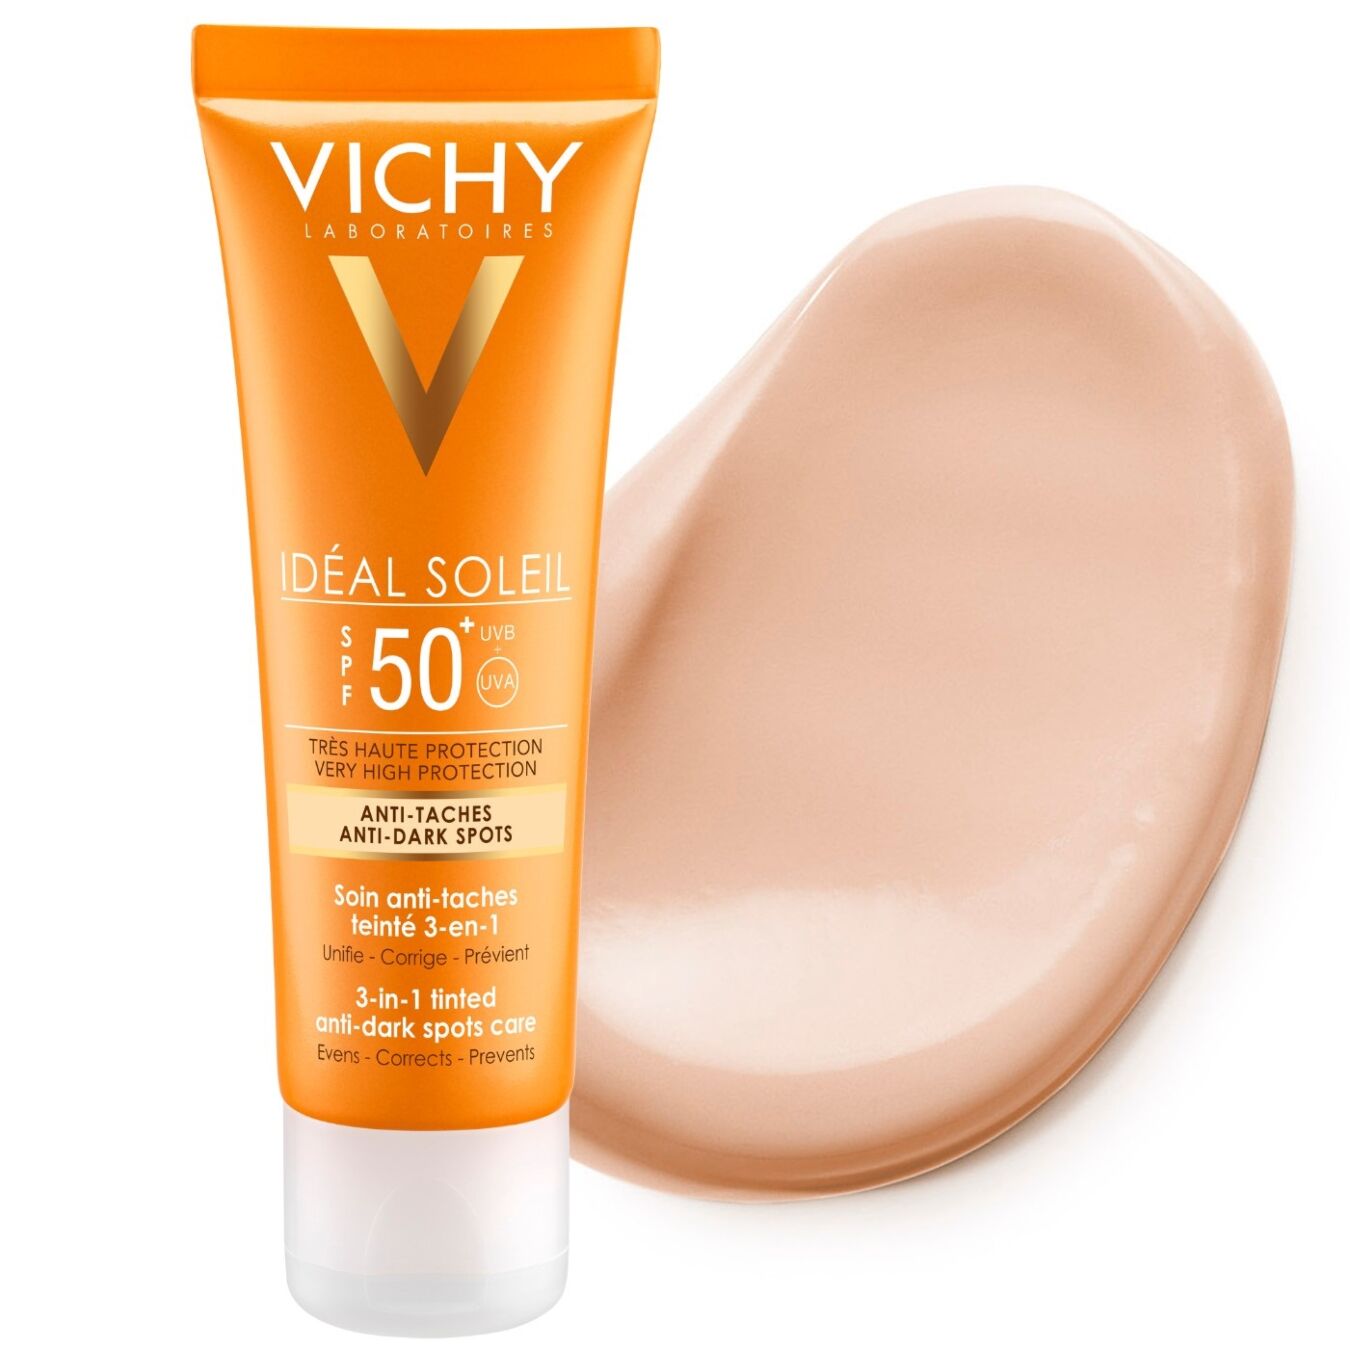 Capital soleil 50 мл. Vichy SPF 50. Vichy SPF 50 Soleil. Vichy Capital Soleil SPF 50 Anti-taches 3. Vichy Capital Soleil SPF 50 tres Haute Protection very High Protection.